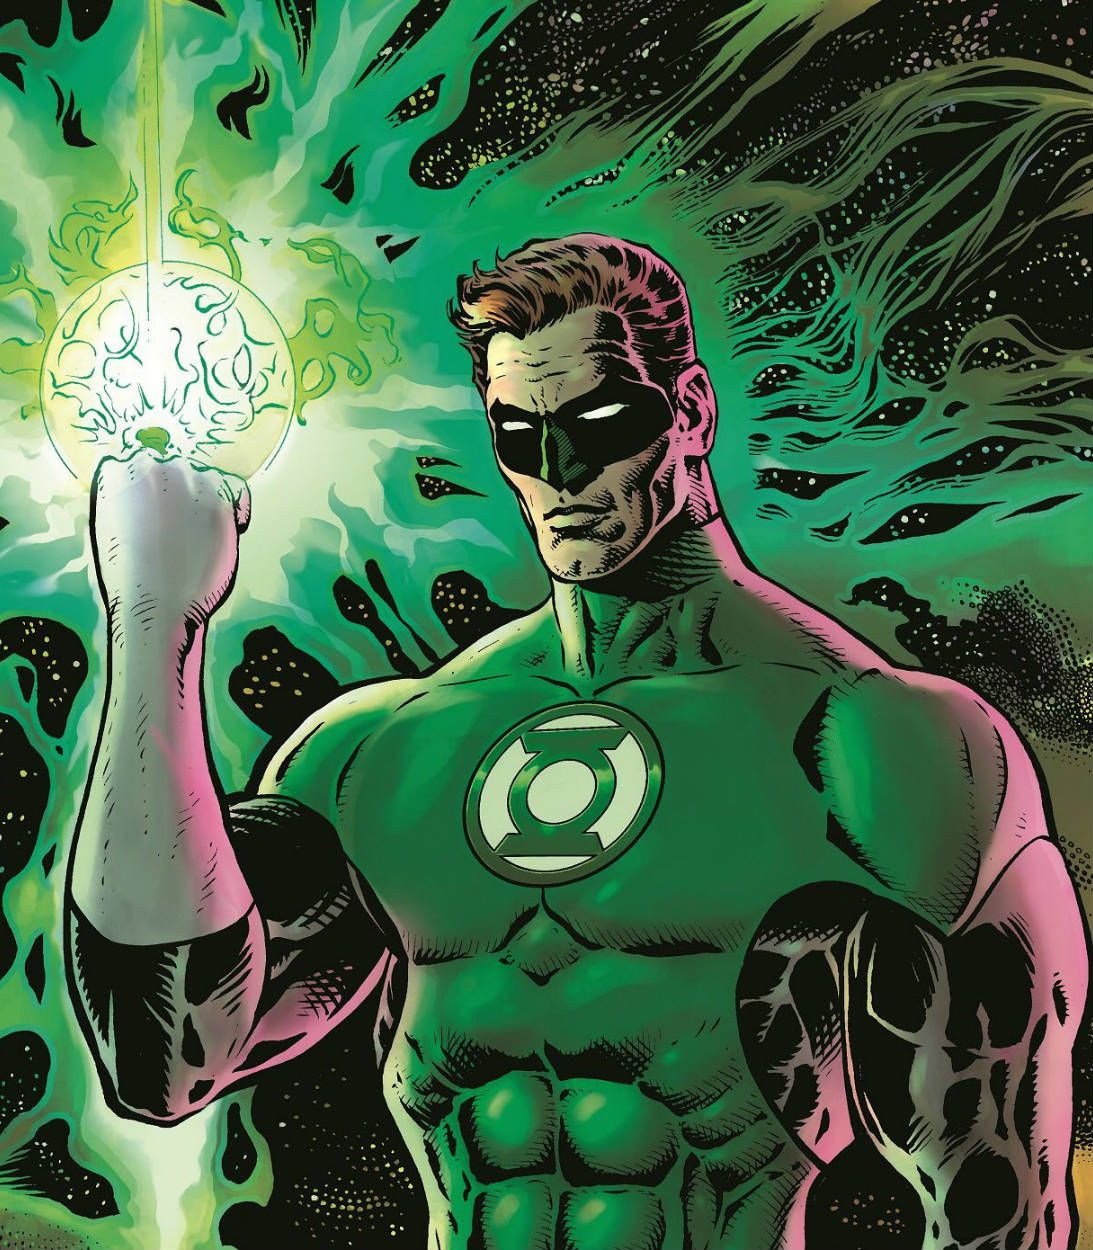 DC's Green Lantern TV show coming to HBO Max